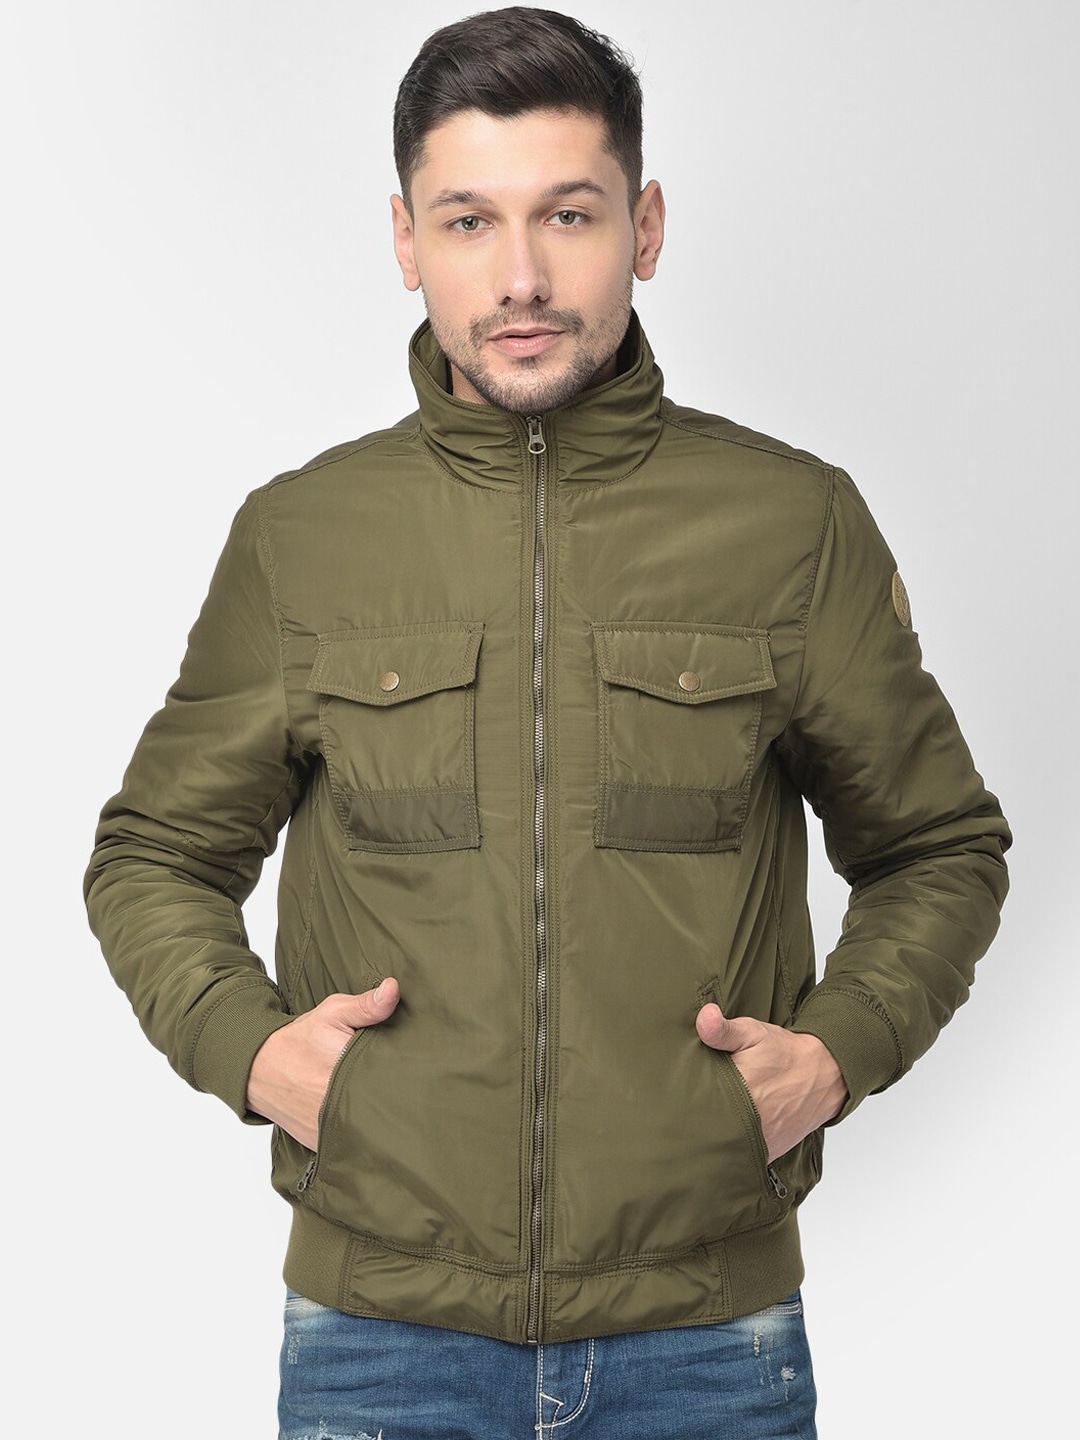 Buy Woodland Jackets For Men At Best Prices Online In India | Tata CLiQ-thanhphatduhoc.com.vn